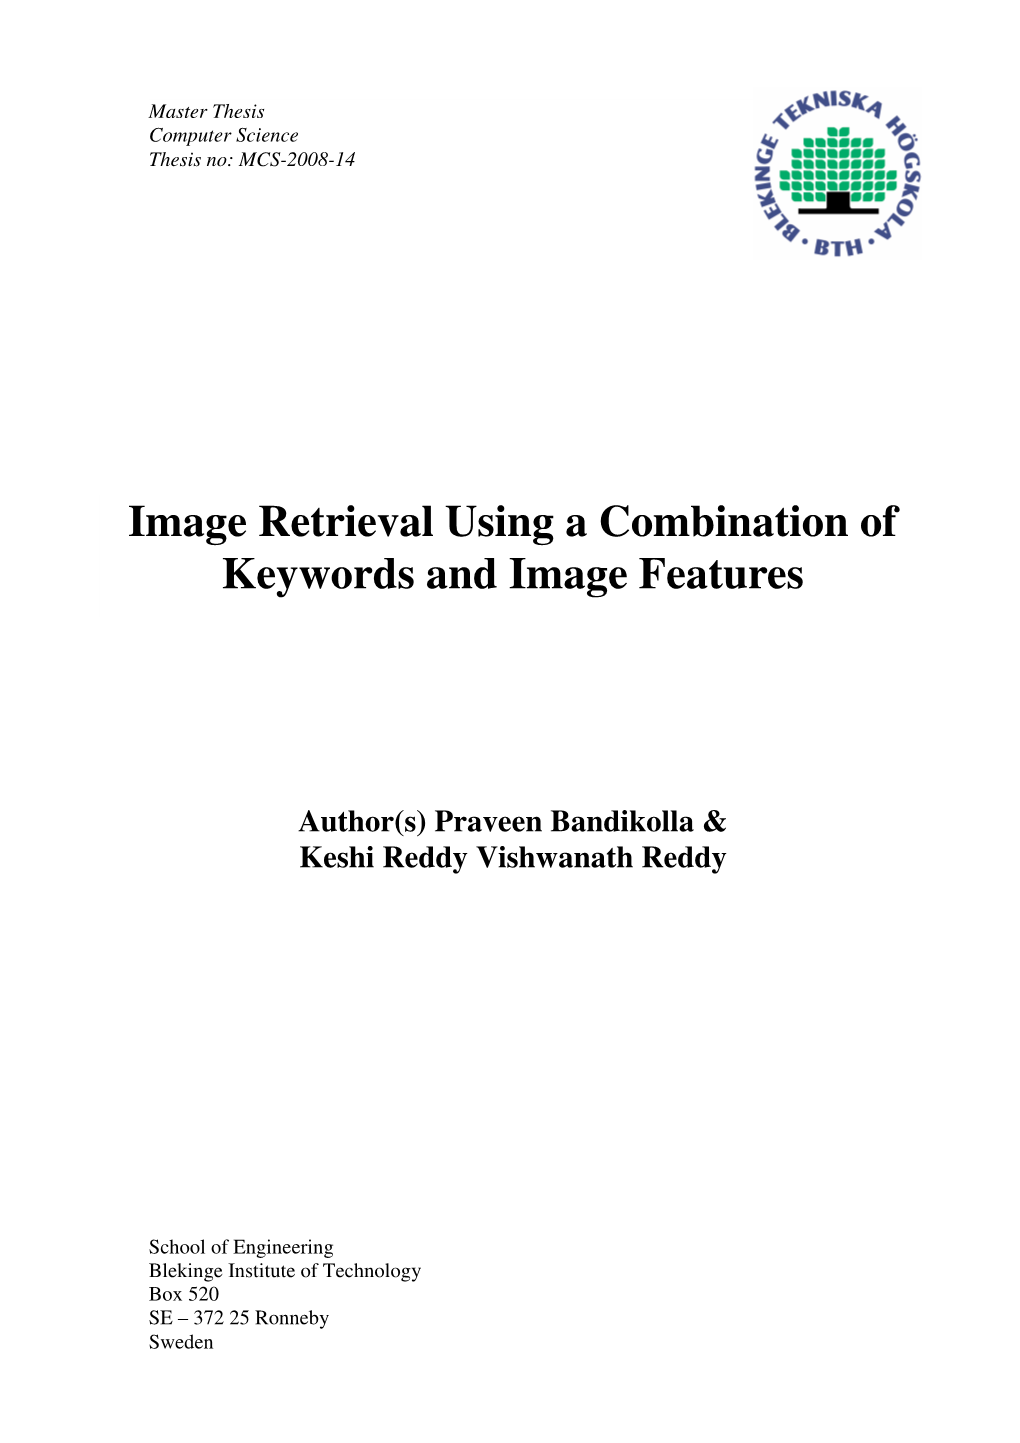 Image Retrieval Using a Combination of Keywords and Image Features